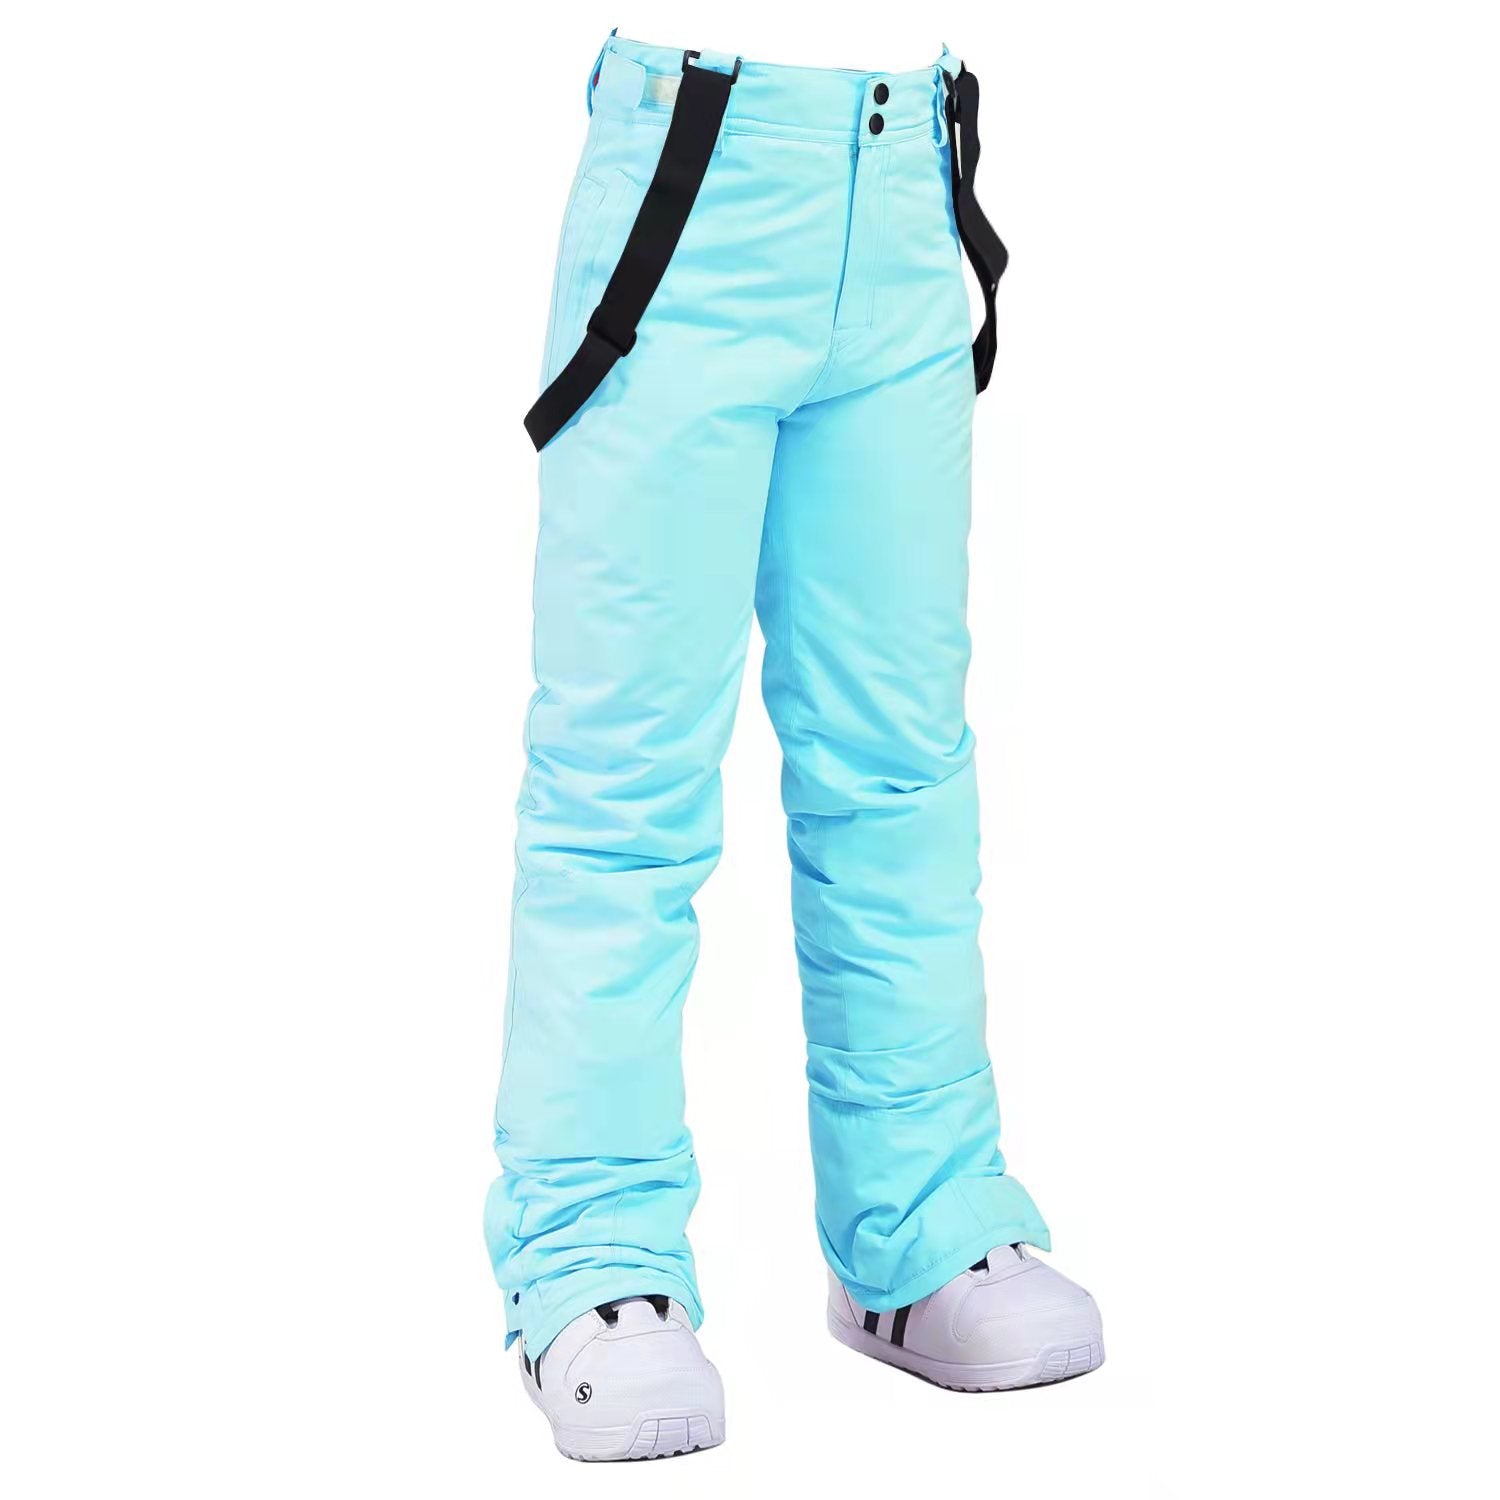 Eastern Mountain Sports 100% Viscose Snow Pants for Women